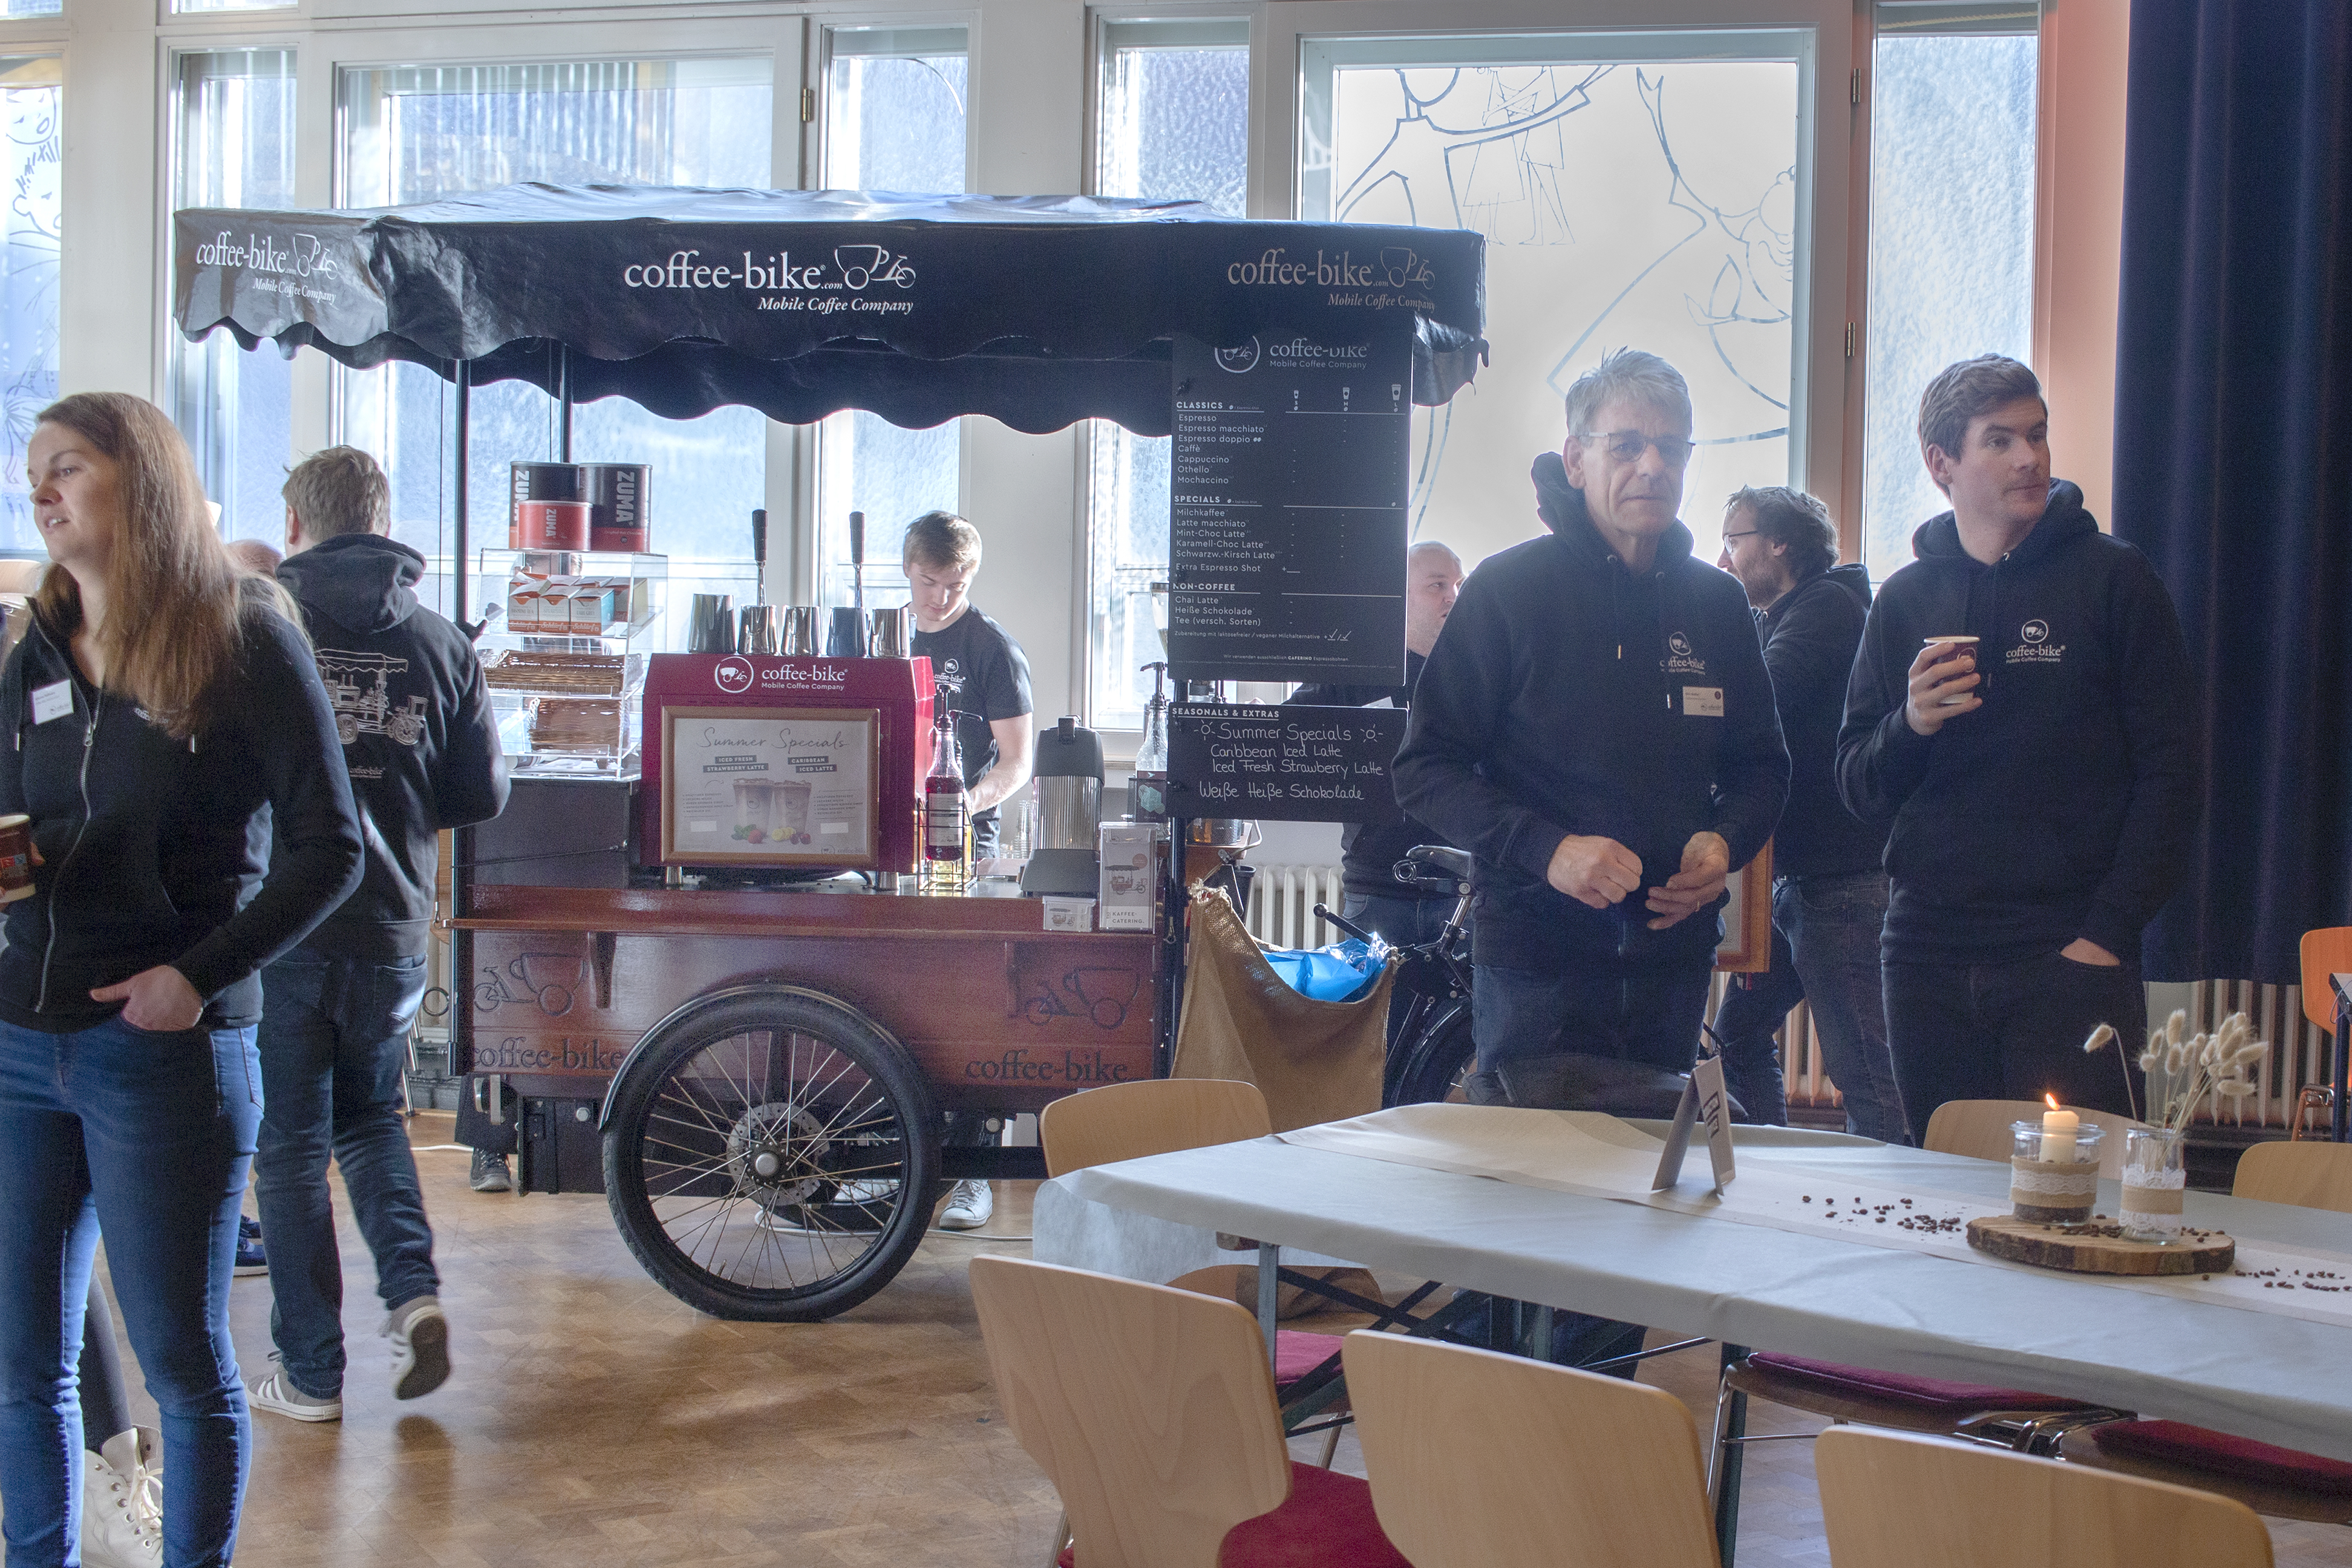 A fully equipped Coffee-Bike stands in a room with tables, chairs and people